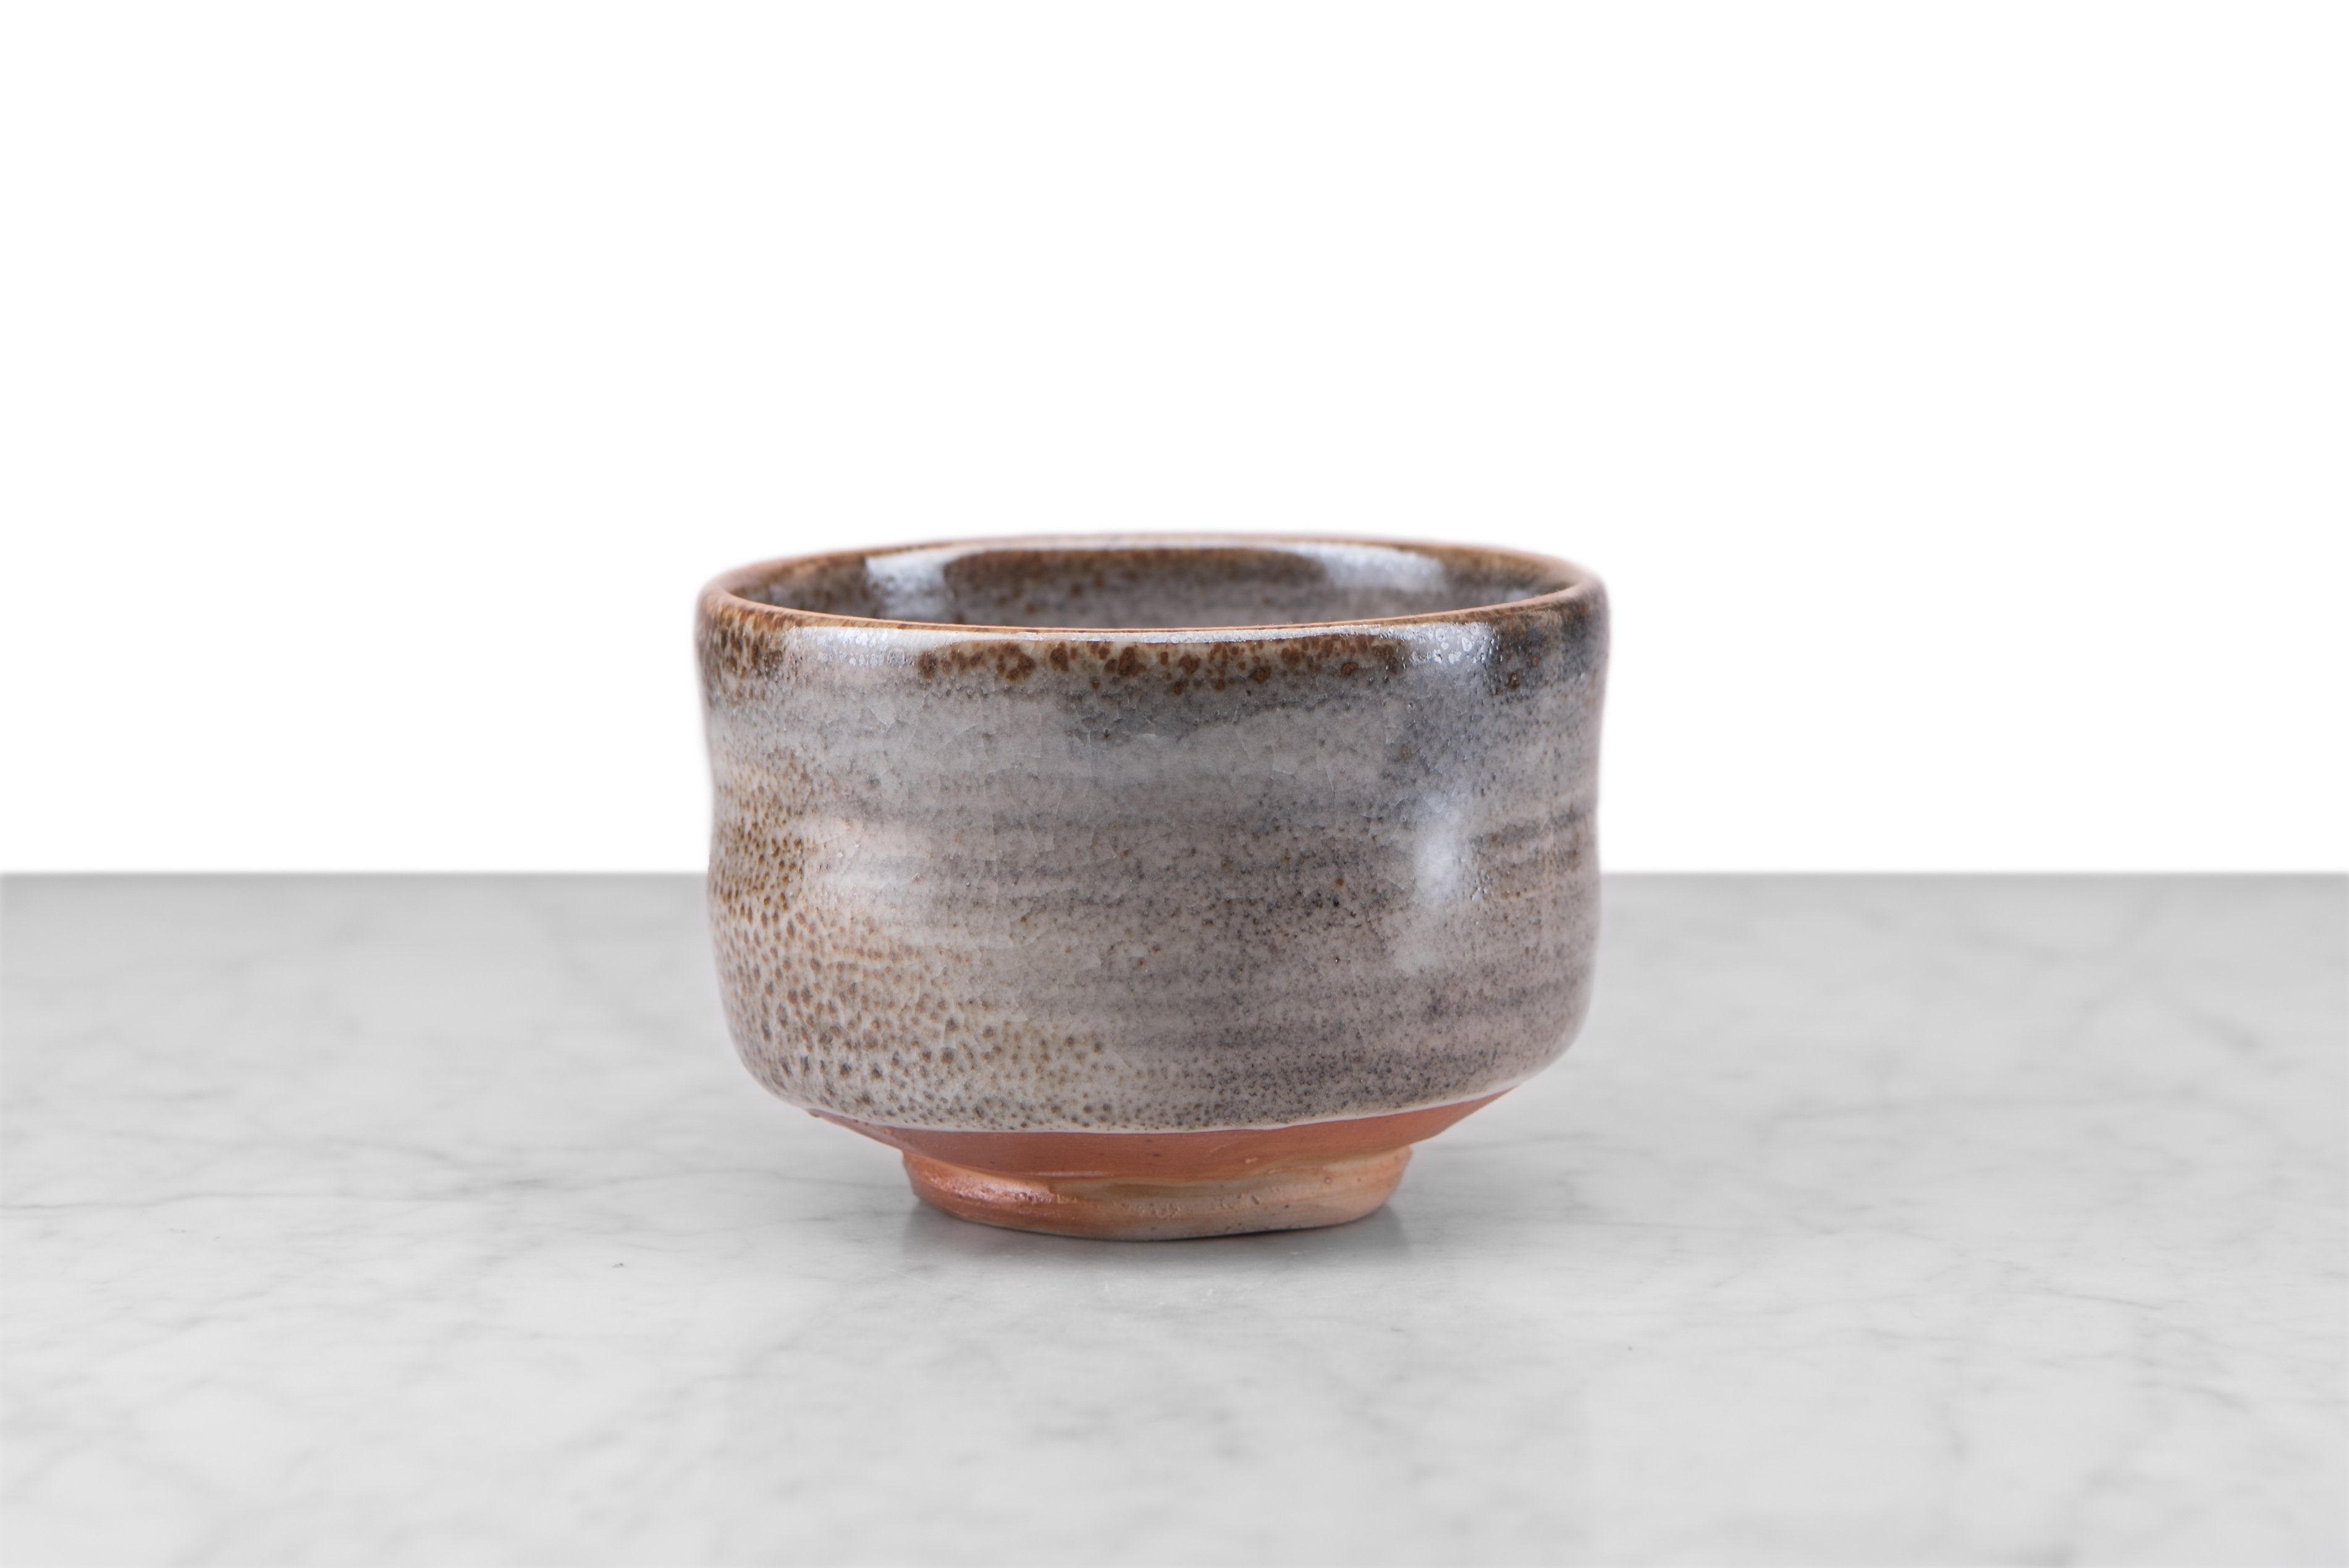 matcha chawan deep bowl with smooth, slightly curved sides in a grey and brown glaze